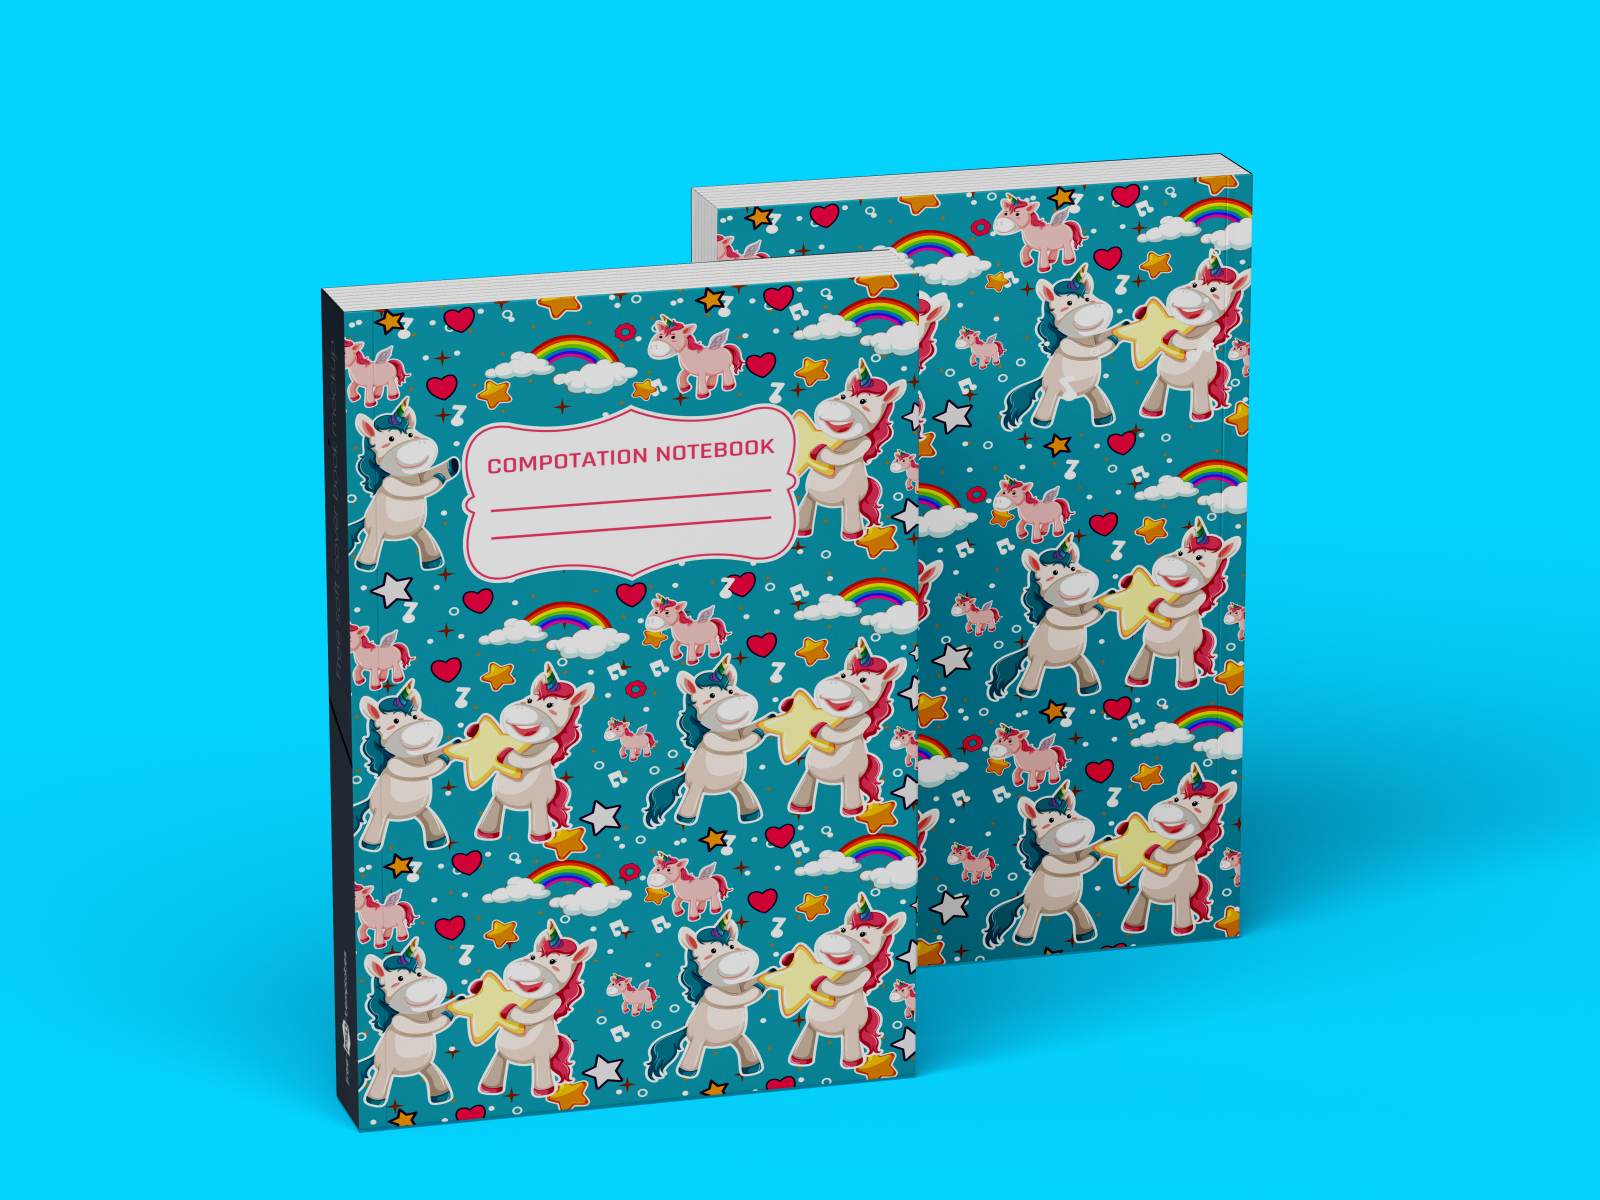 Composition Notebook Cover For KDP by JUNAED MIA on Dribbble